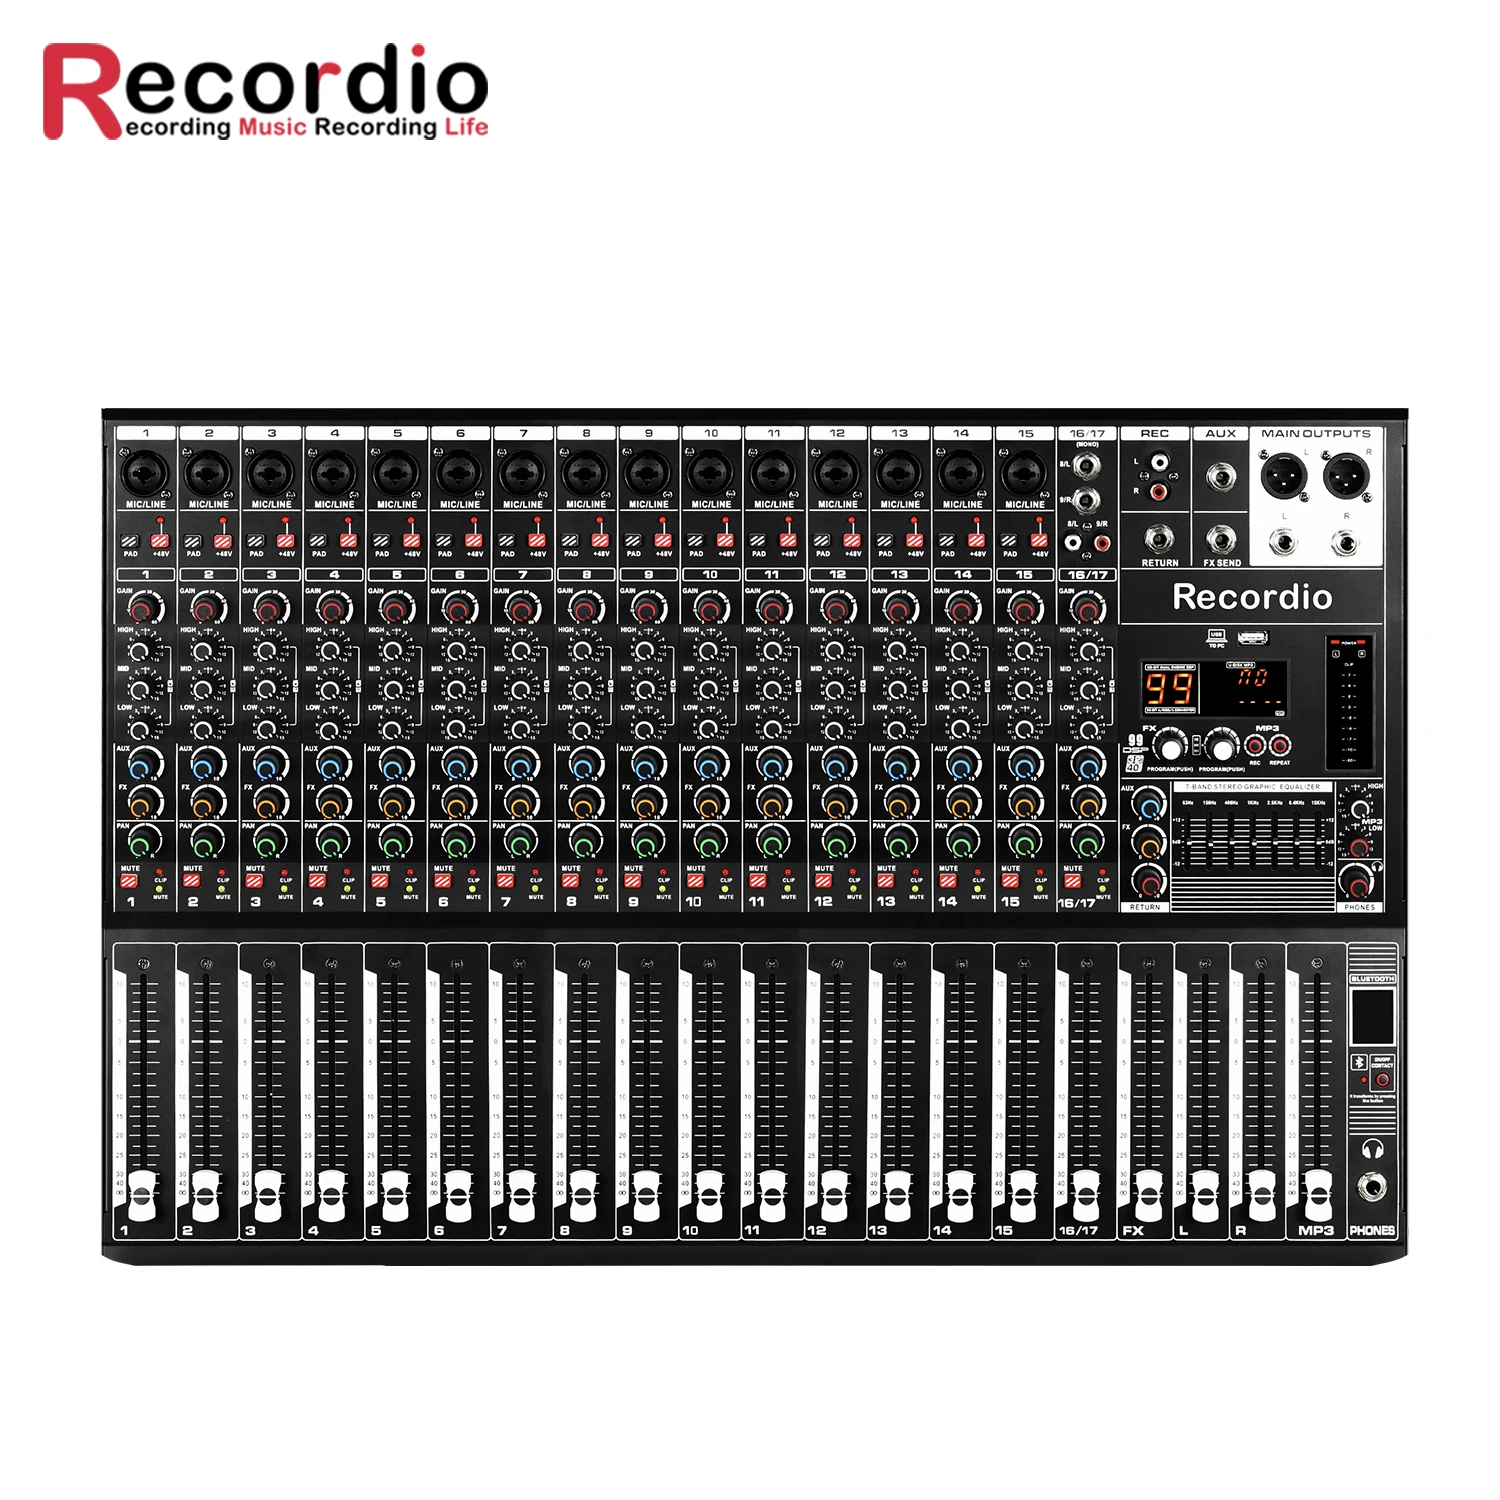 GAX-Q16 Recordio high quality audio mixer professional digital stage mixer with 99DSP7 segment equalizer